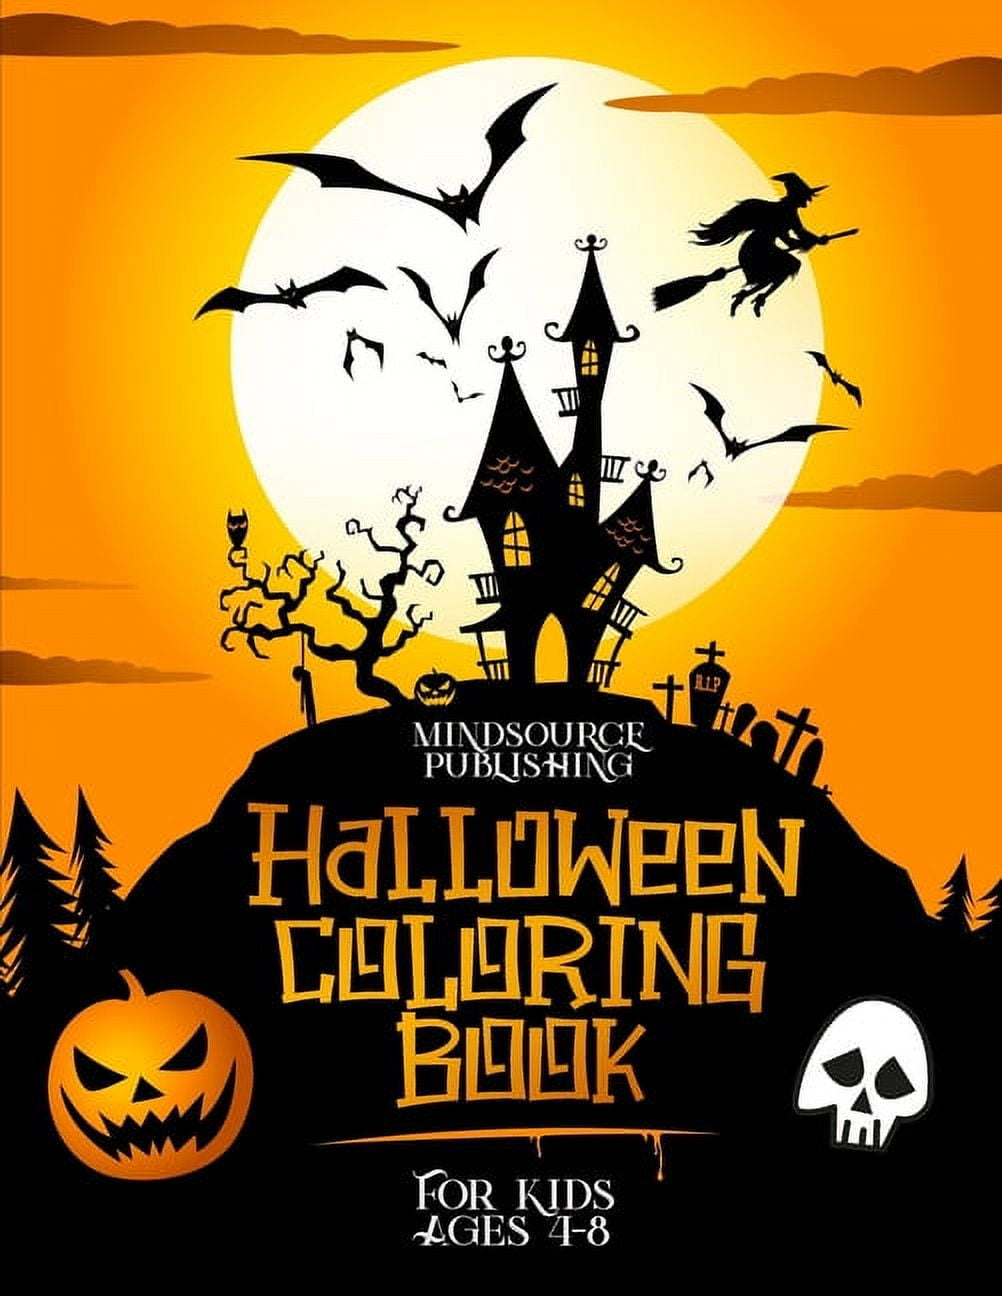 Halloween Coloring Book for Kids: For Age 2-4, 3-5, 4-8, Toddlers - A Fun  Halloween Activity Gift For Boys/Girls To Color Including Witches,  Monsters, (Paperback)